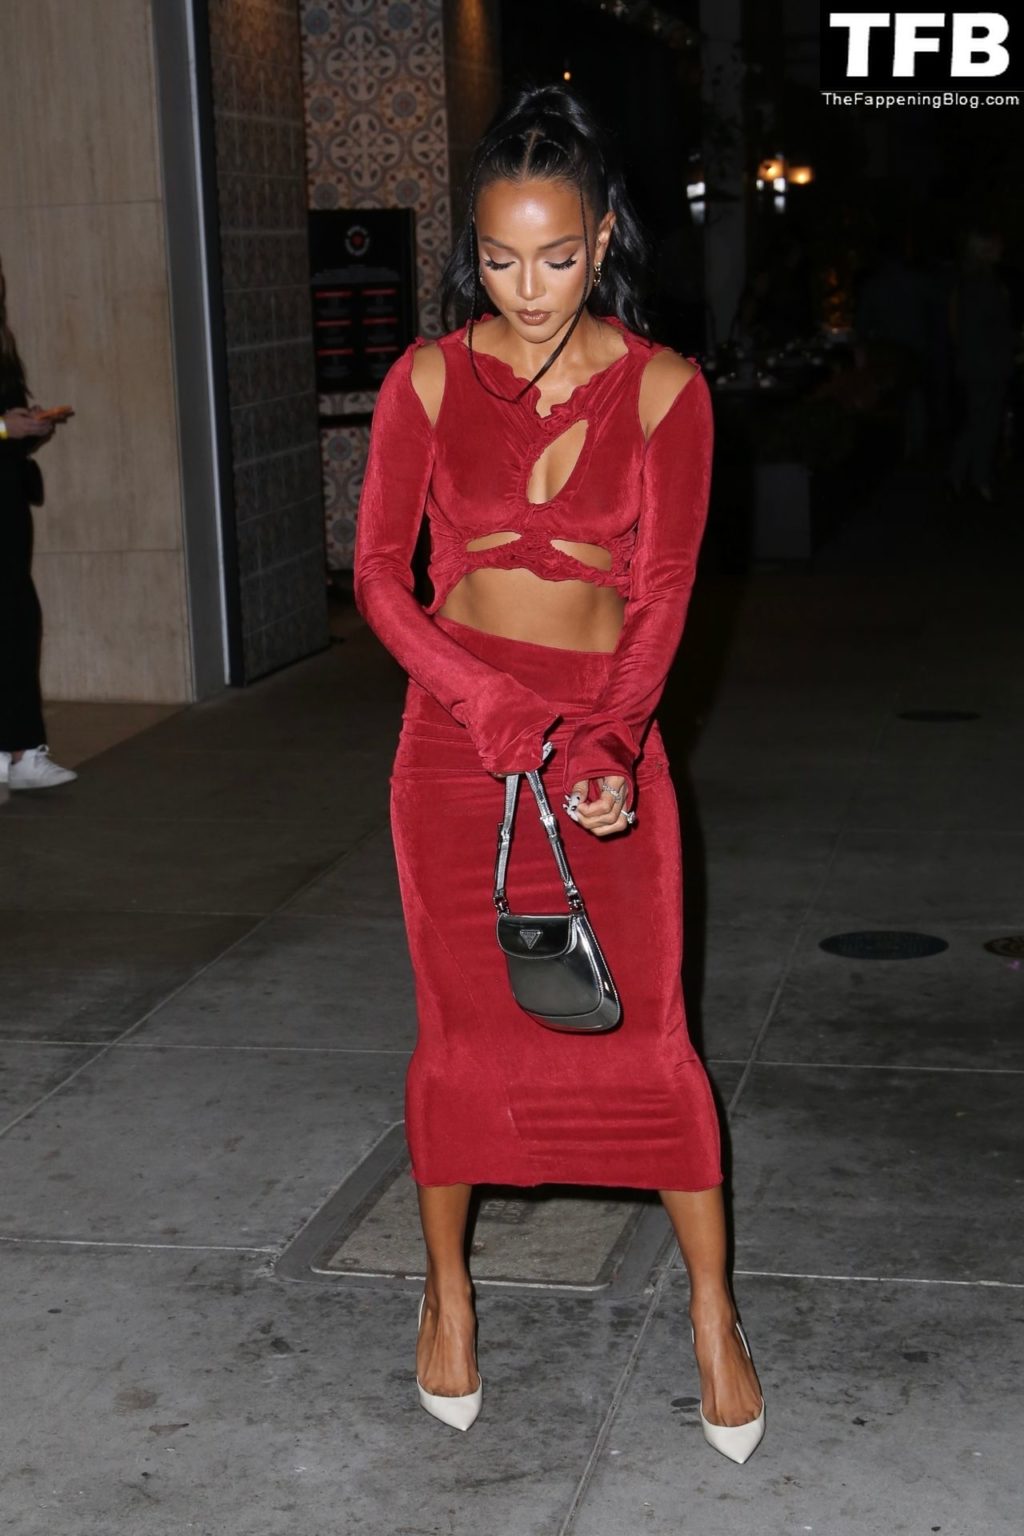 Karrueche Tran Sexy The Fappening Blog 33 1024x1536 - Karrueche Tran Shows Her Pokies in a Red Dress at The Hollywood Reporter’s Oscar Nominees Night (68 Photos)